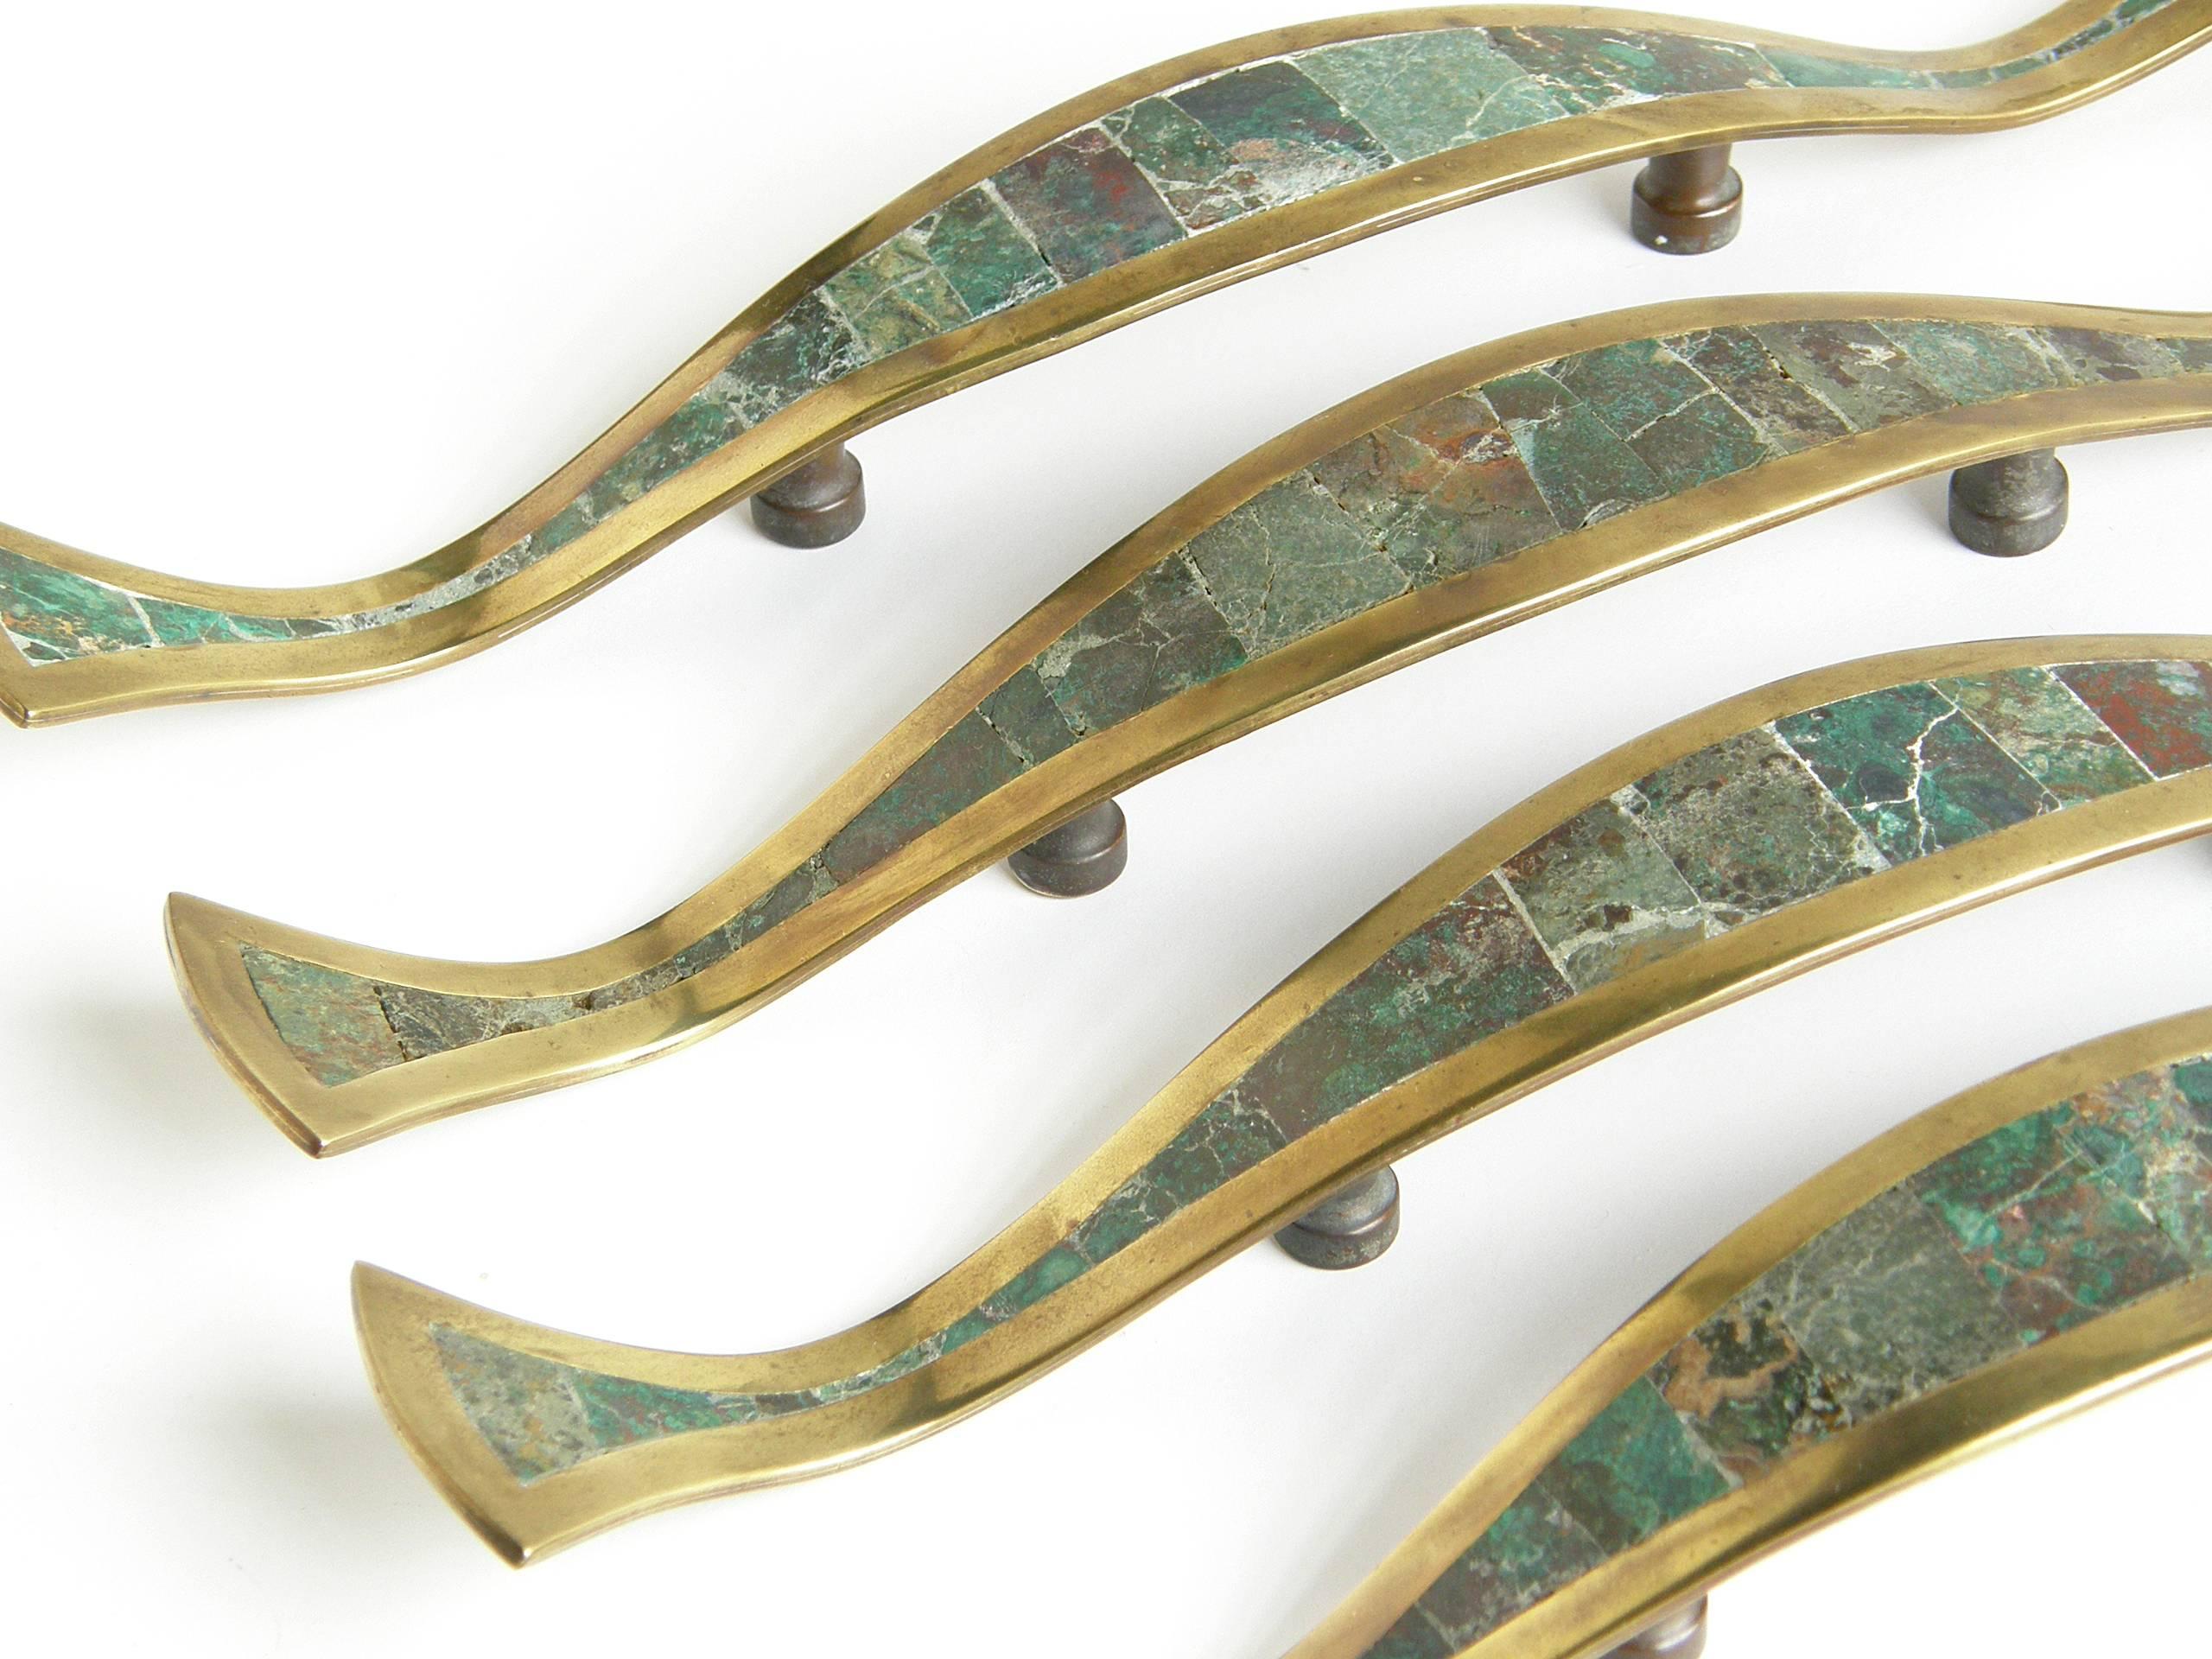 Hand-Crafted Los Castillo Brass Handles with Inlaid Stone